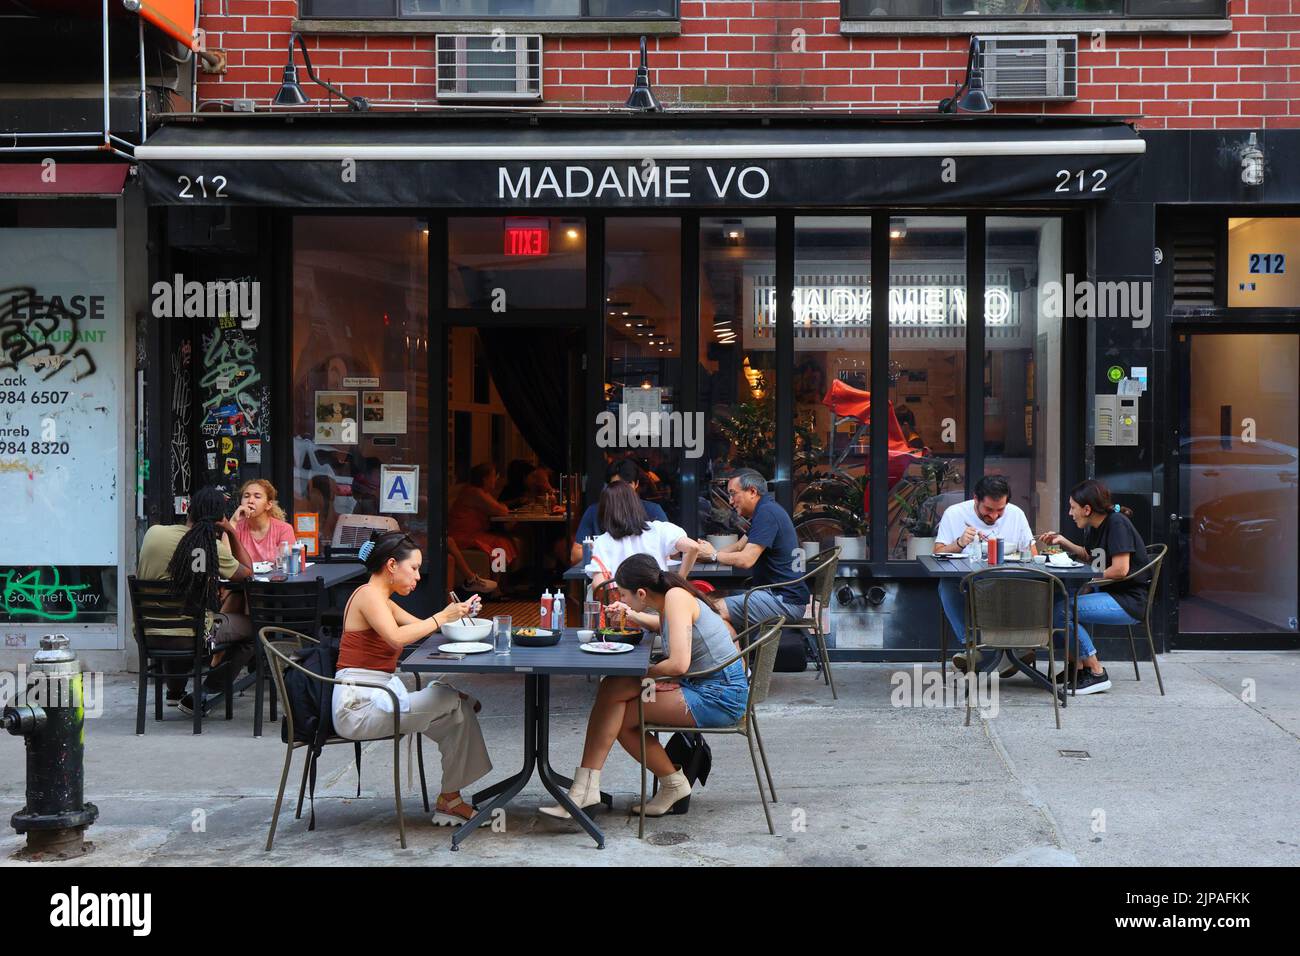 Madame Vo, 212 E 10th St, New York, NYC storefront photo of a Vietnamese restaurant in Manhattan's East Village. Stock Photo